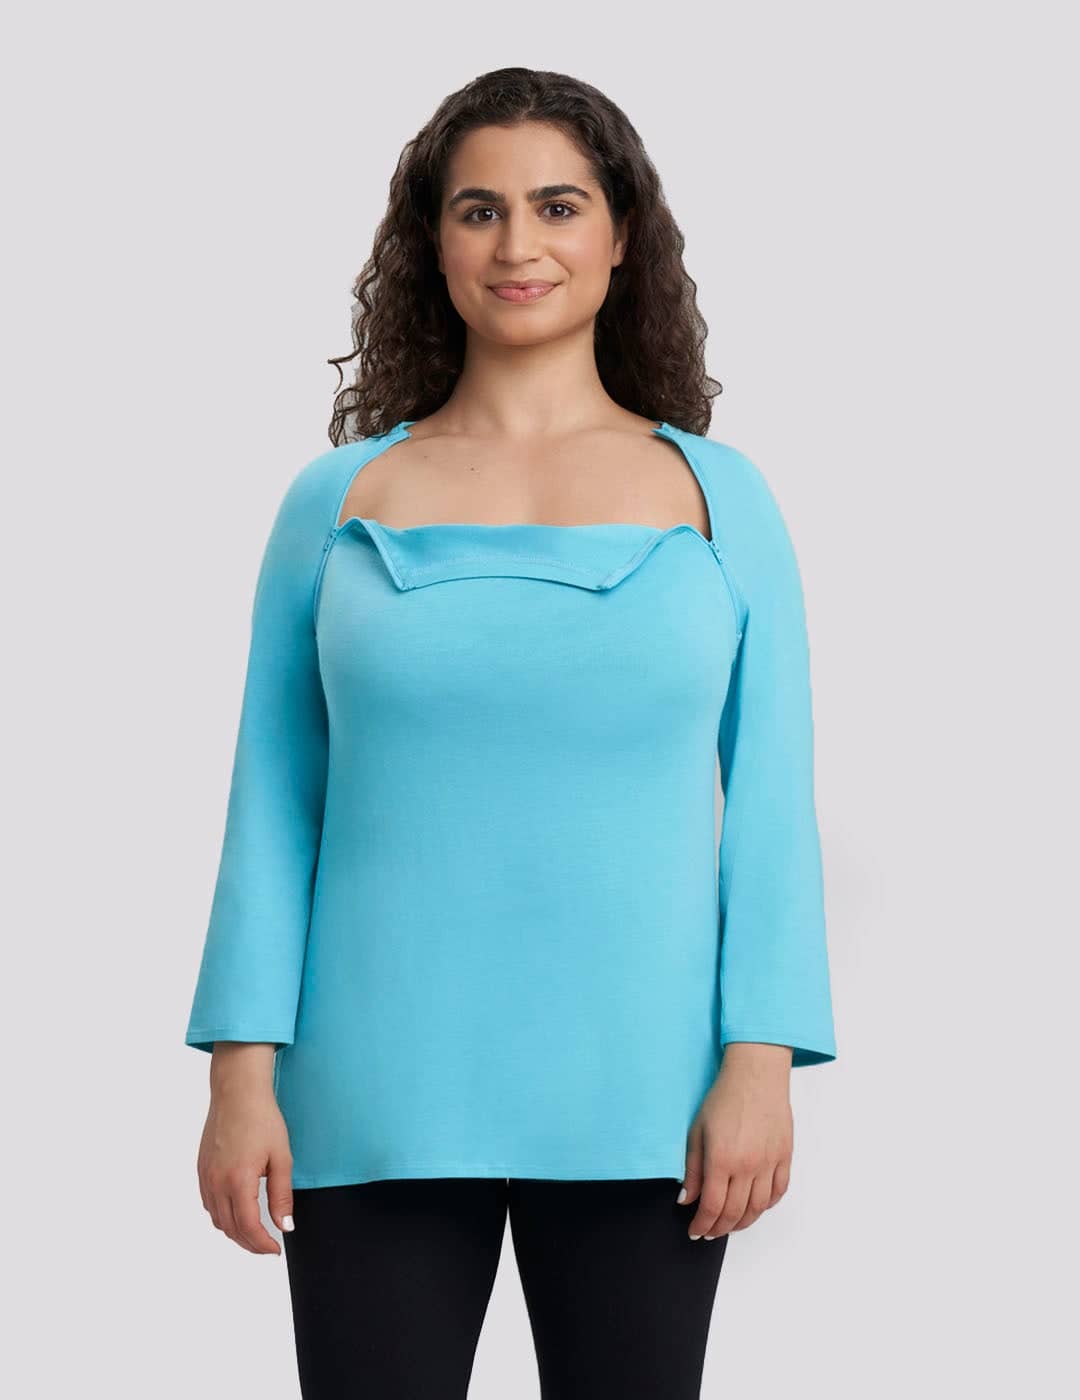 Womens Chest Port Access Teal Chemo